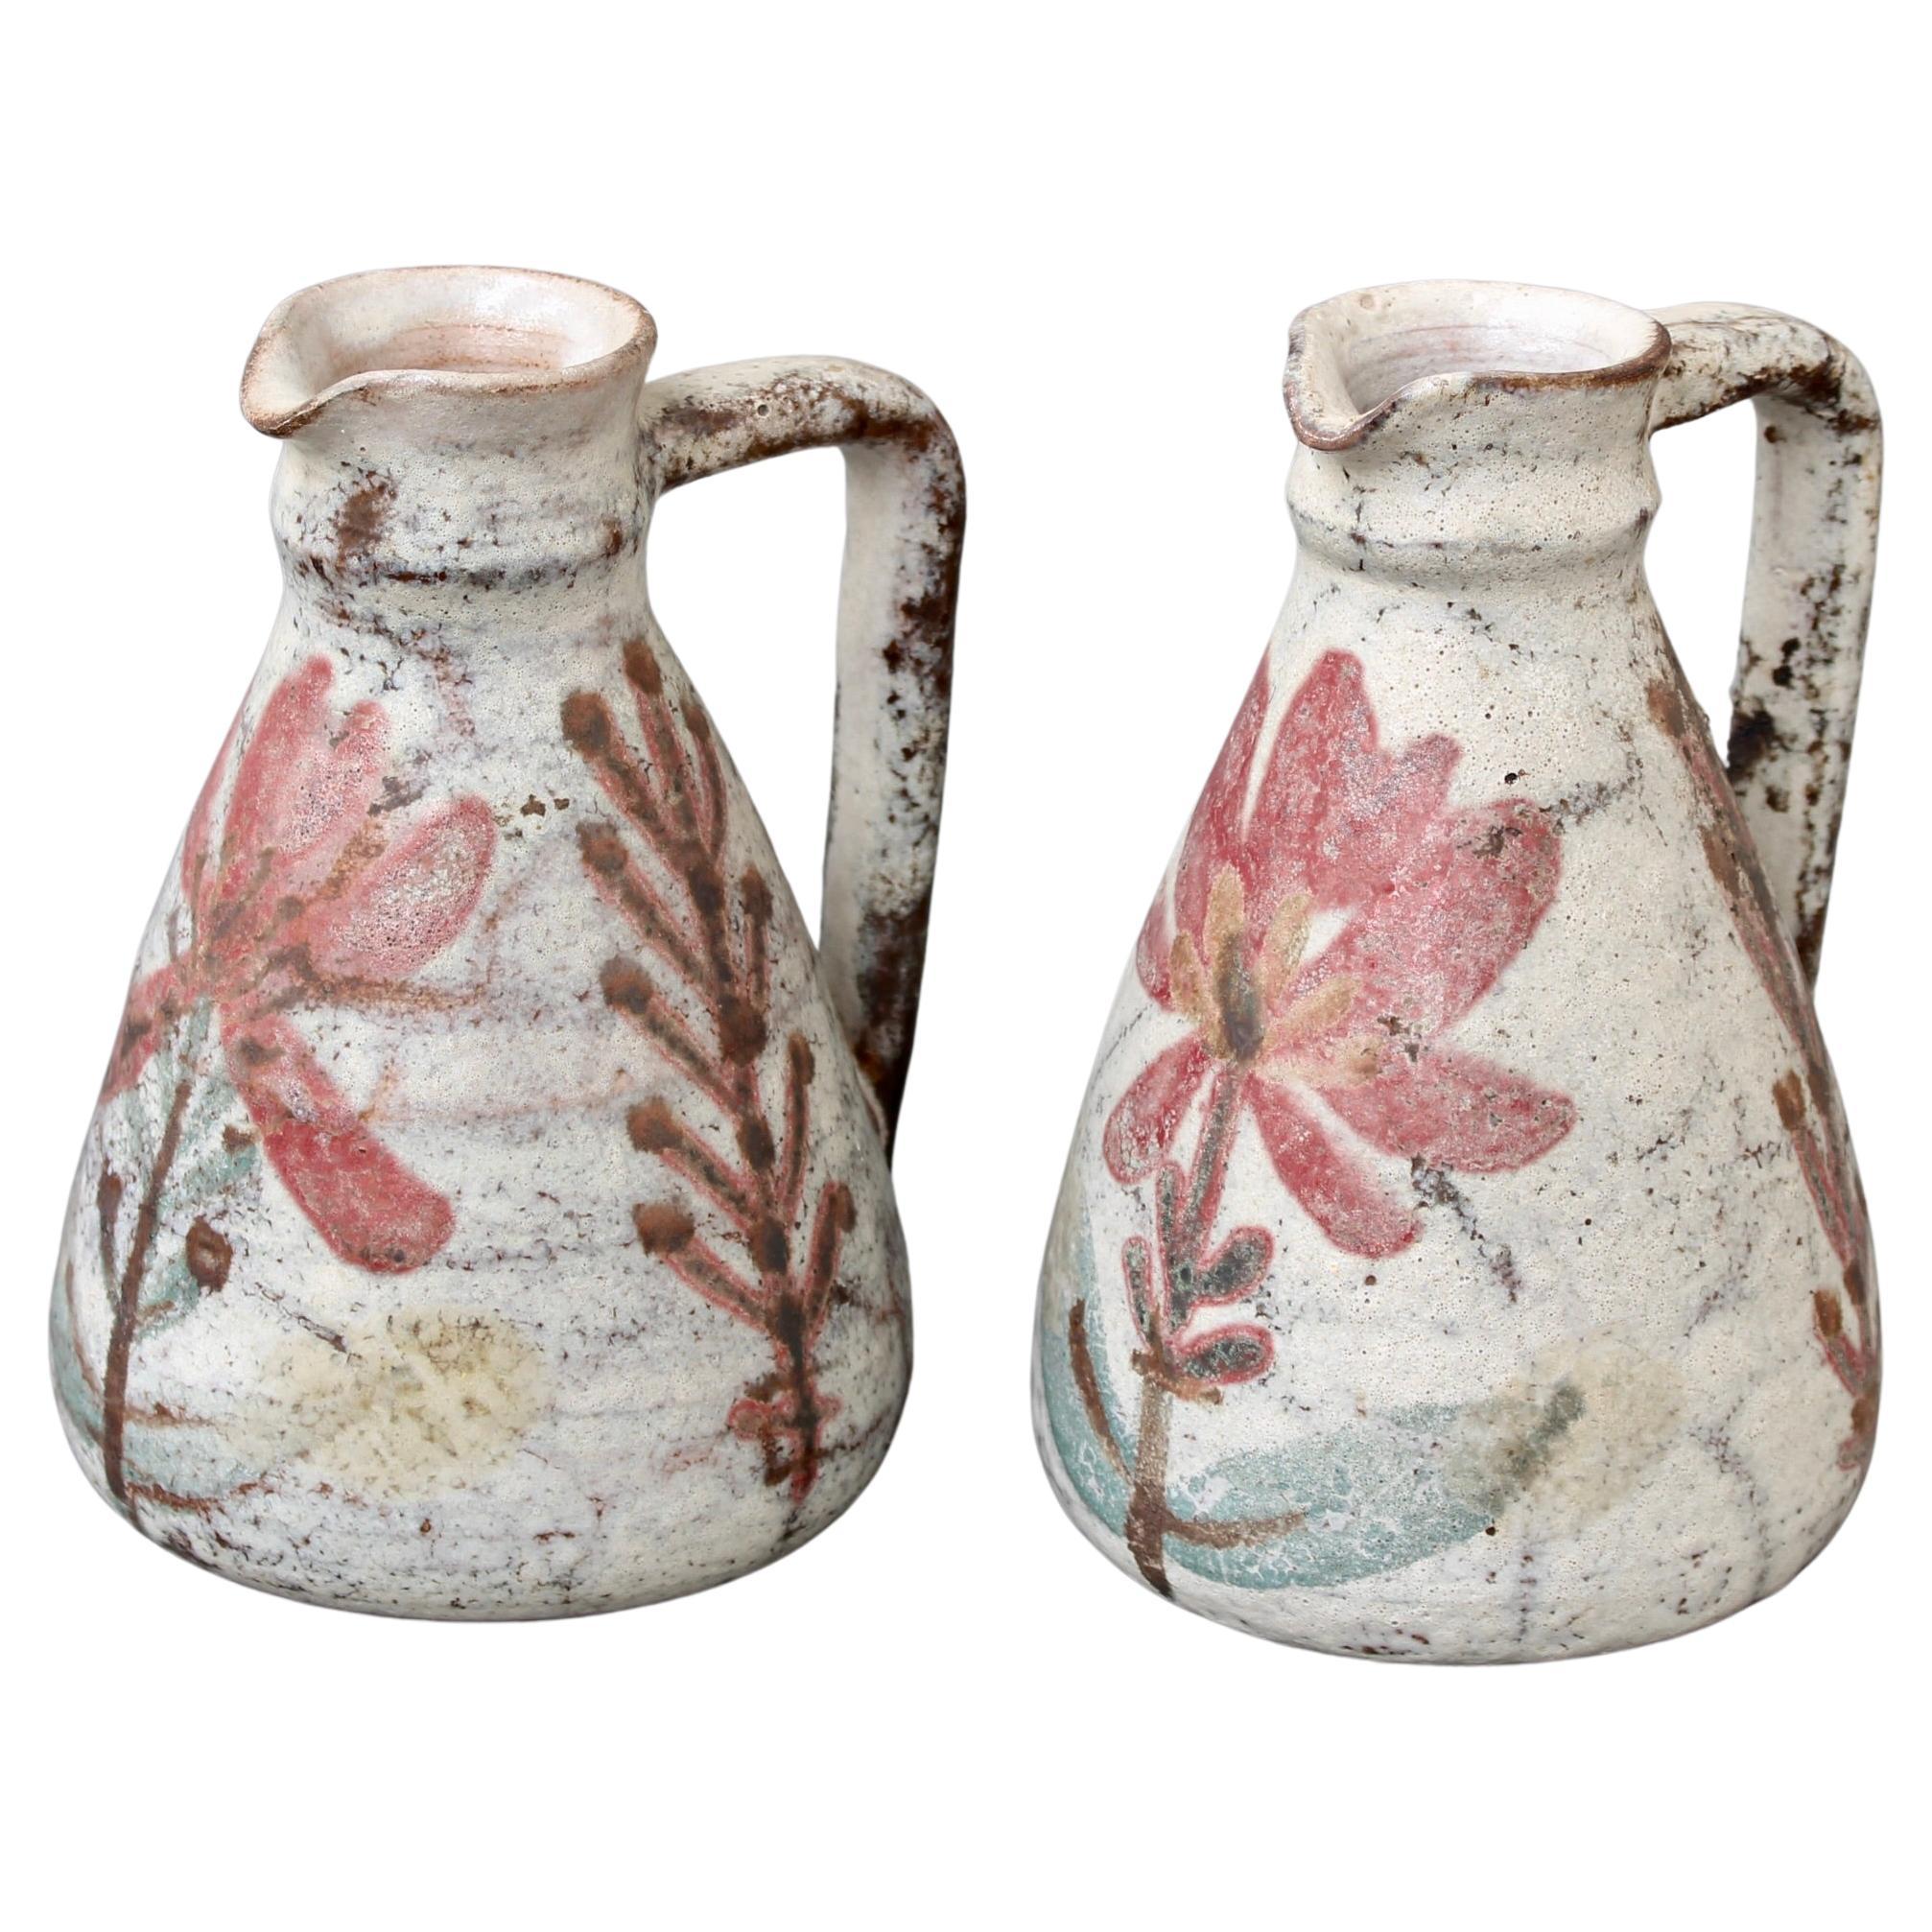 Pair of French Decorative Ceramic Vessels with Handle and Spout - Small For Sale